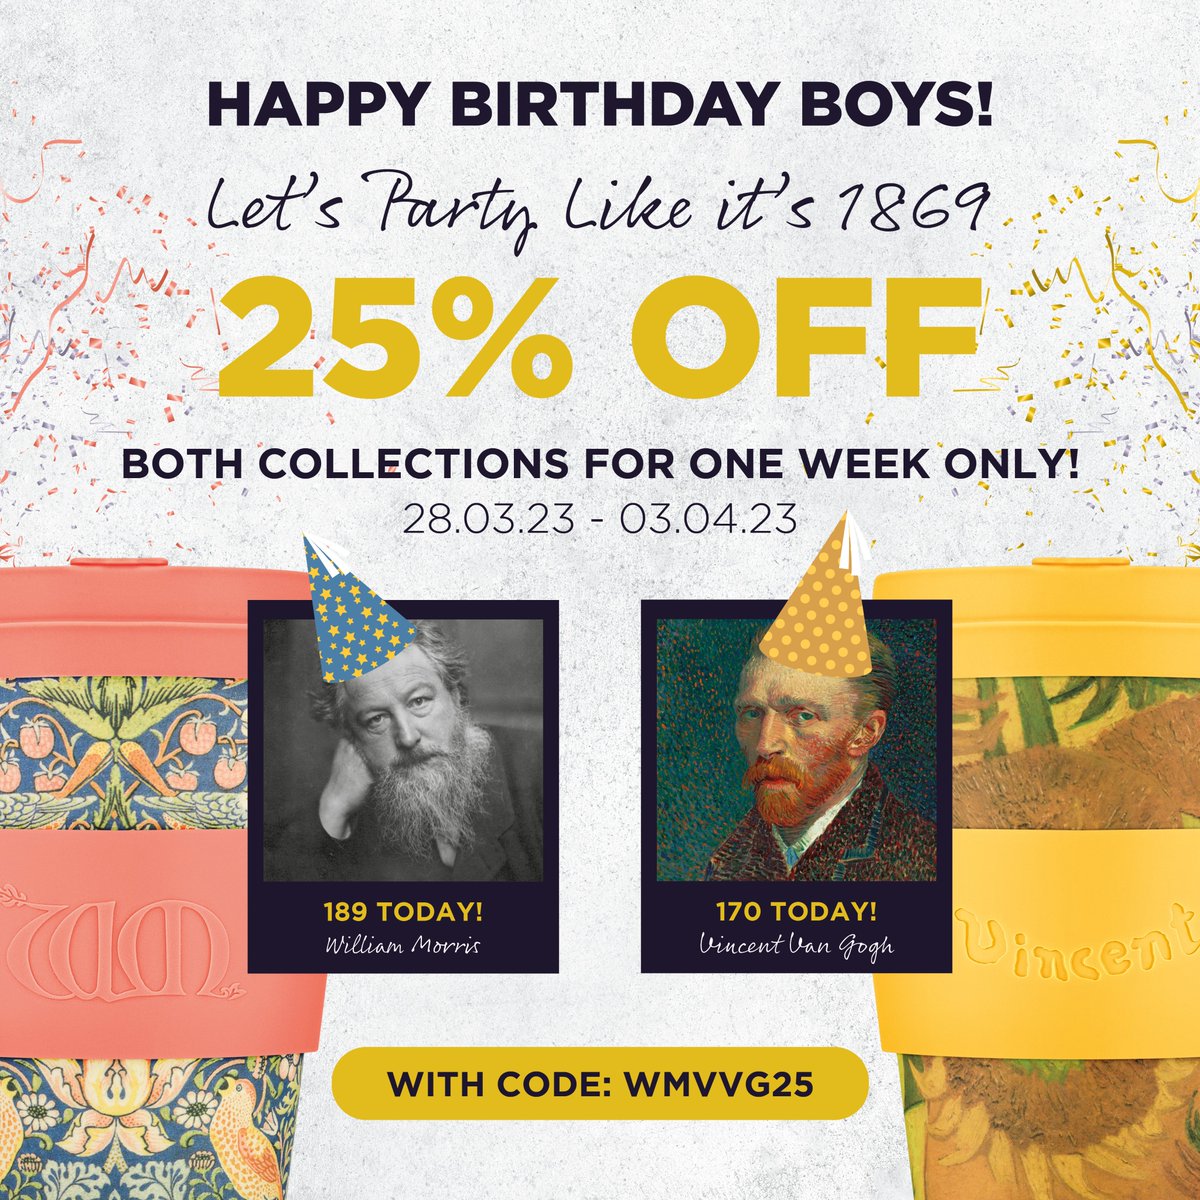 Happy Birthday Chaps! 🥳 For 72 hours only we're slicing 25% off all William Morris and Vincent Van Gogh designs in celebration of their birthdays! Head to our website and shop their Master Collections now - link in bio. #EcoffeeCup #NoExcuseForSingleUse #ChooseToReuse